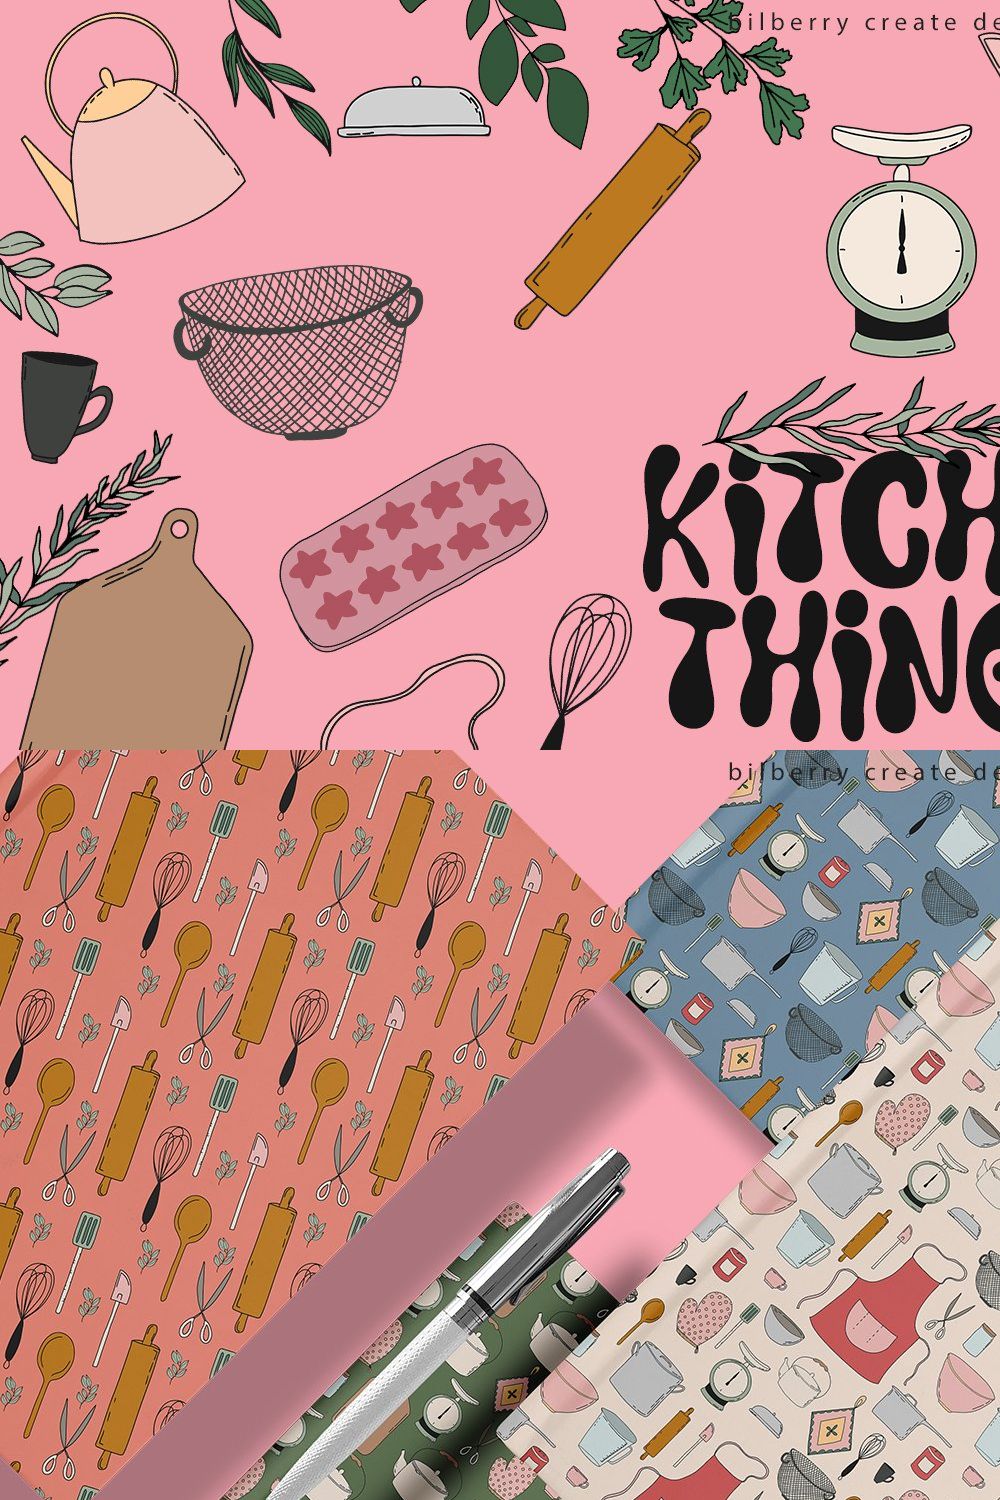 Kitchen things art set pinterest preview image.